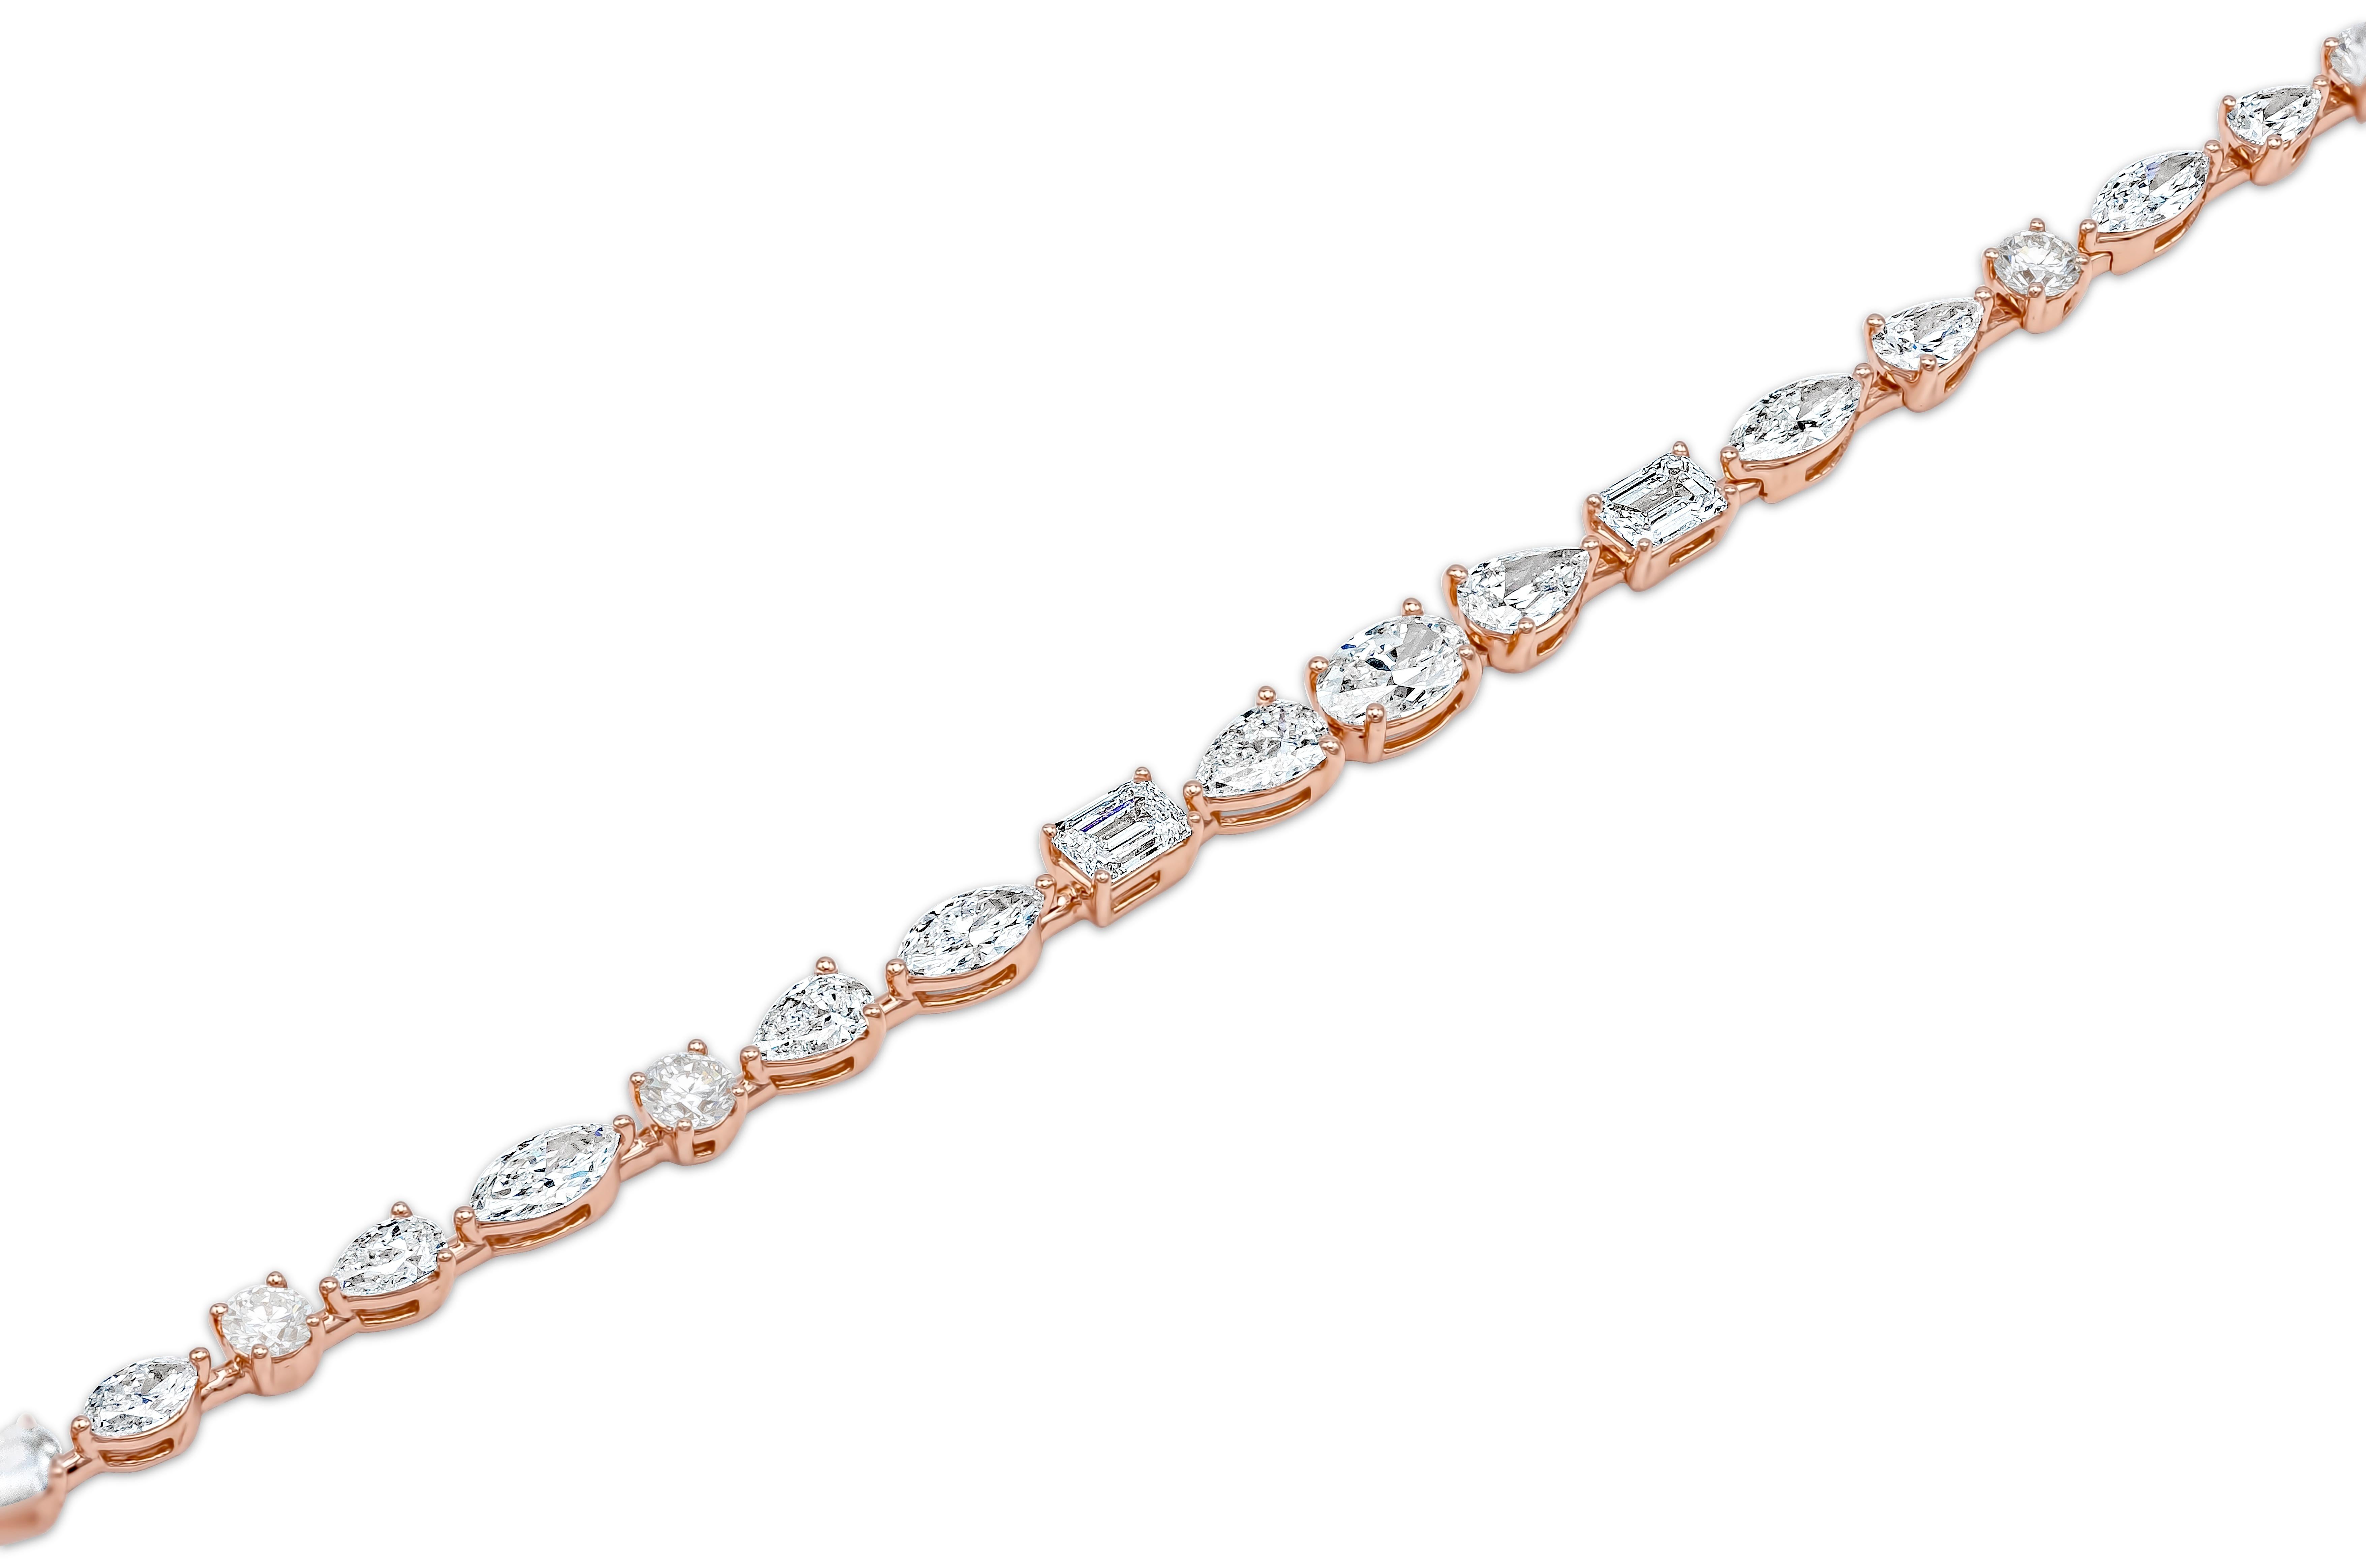 Showcasing a row of different shape diamonds weighing 4.87 carats total, F-G Color and VS-SI in Clarity. Made with 18K Rose Gold, 7 inches in Length. 

Style available in different price ranges. Prices are based on diamond size, and specification.